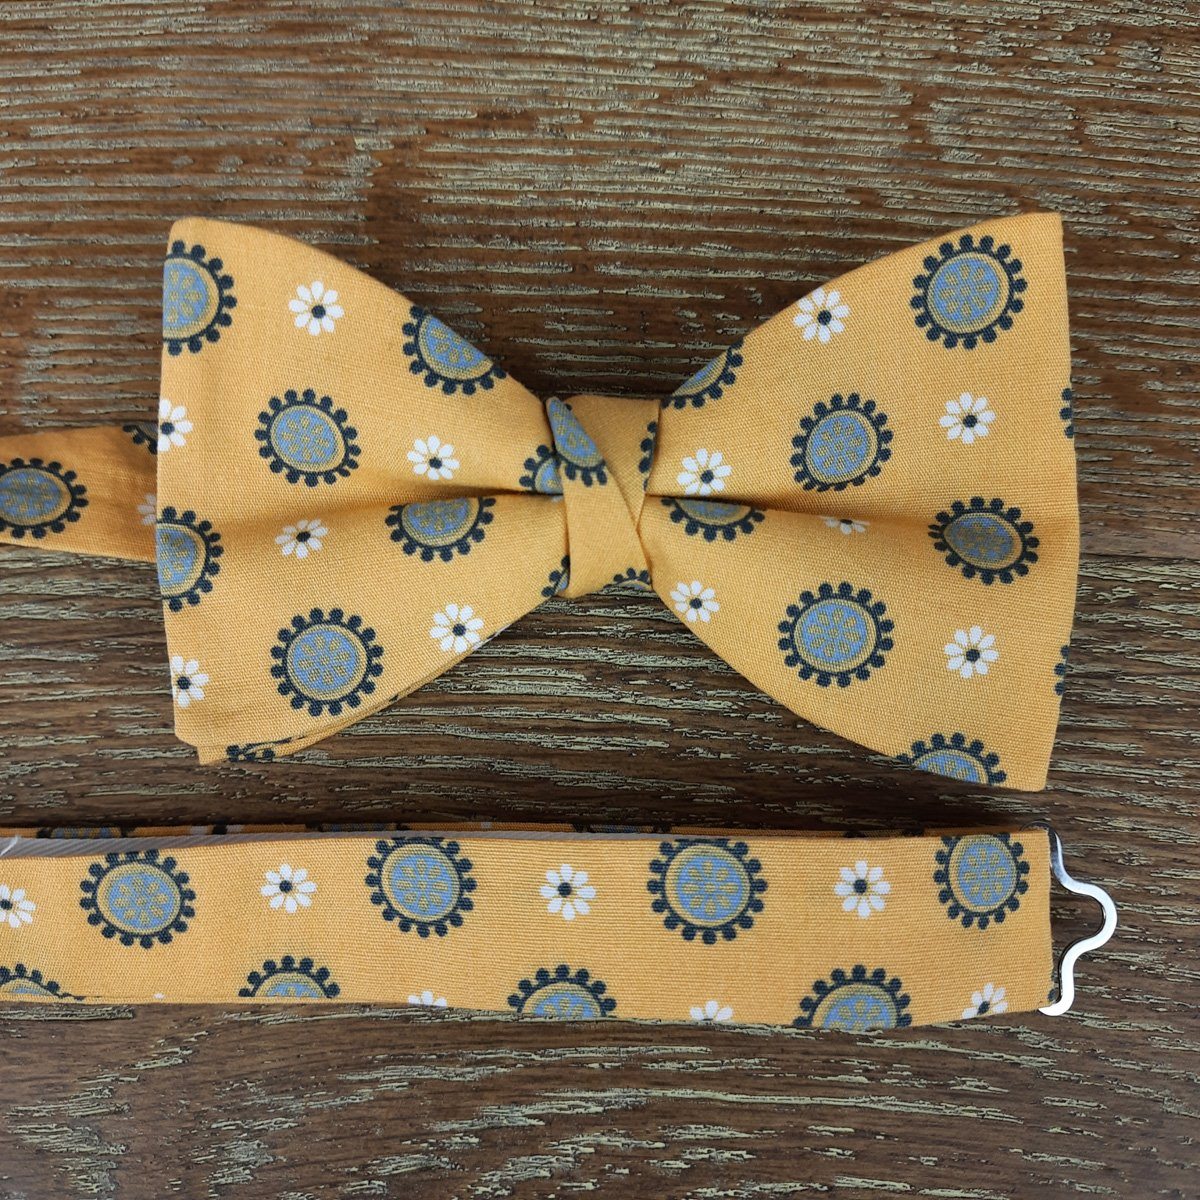 Golden Flower Medallions Cotton Ready-Tied Bow Tie - Bow Ties - - THREADPEPPER